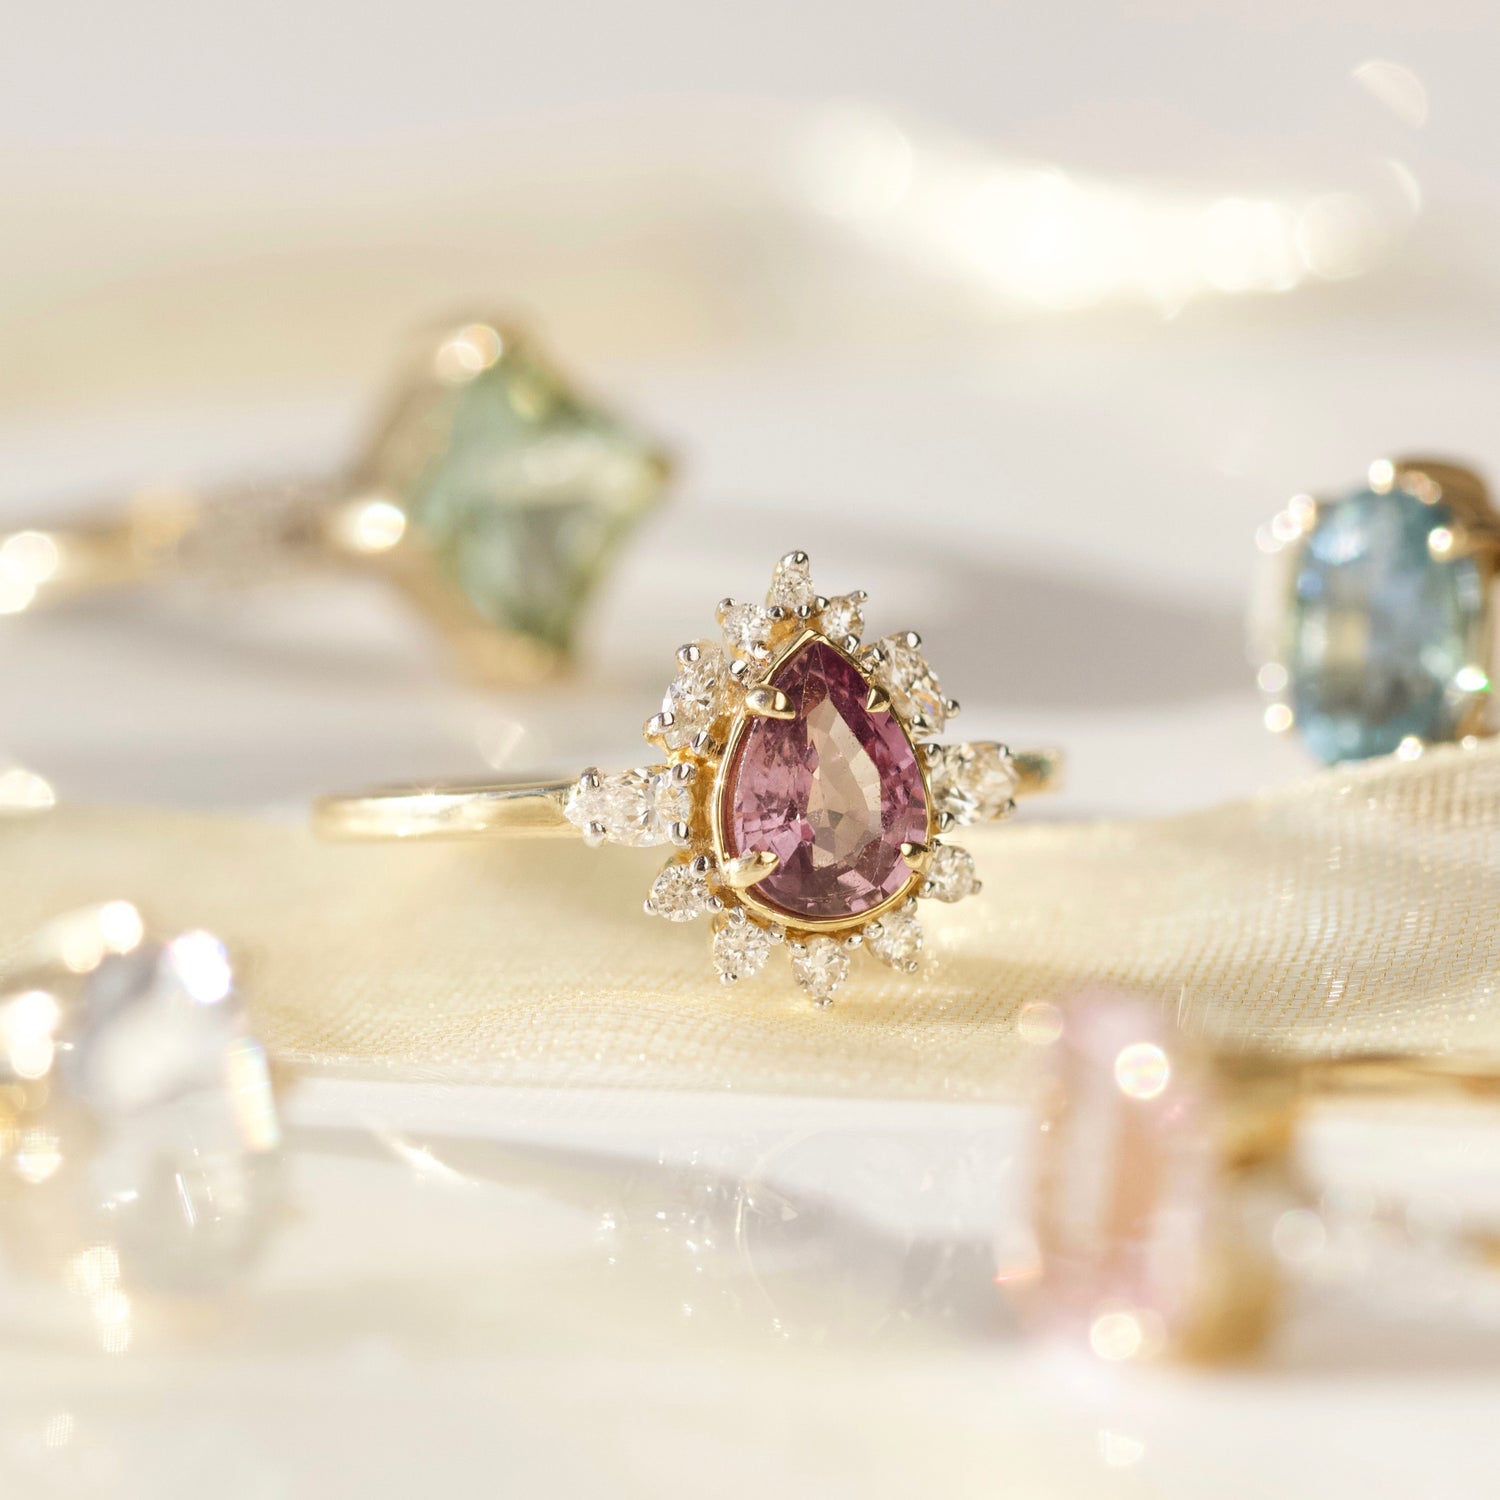 Pink sapphire and diamond ring in 14k solid gold